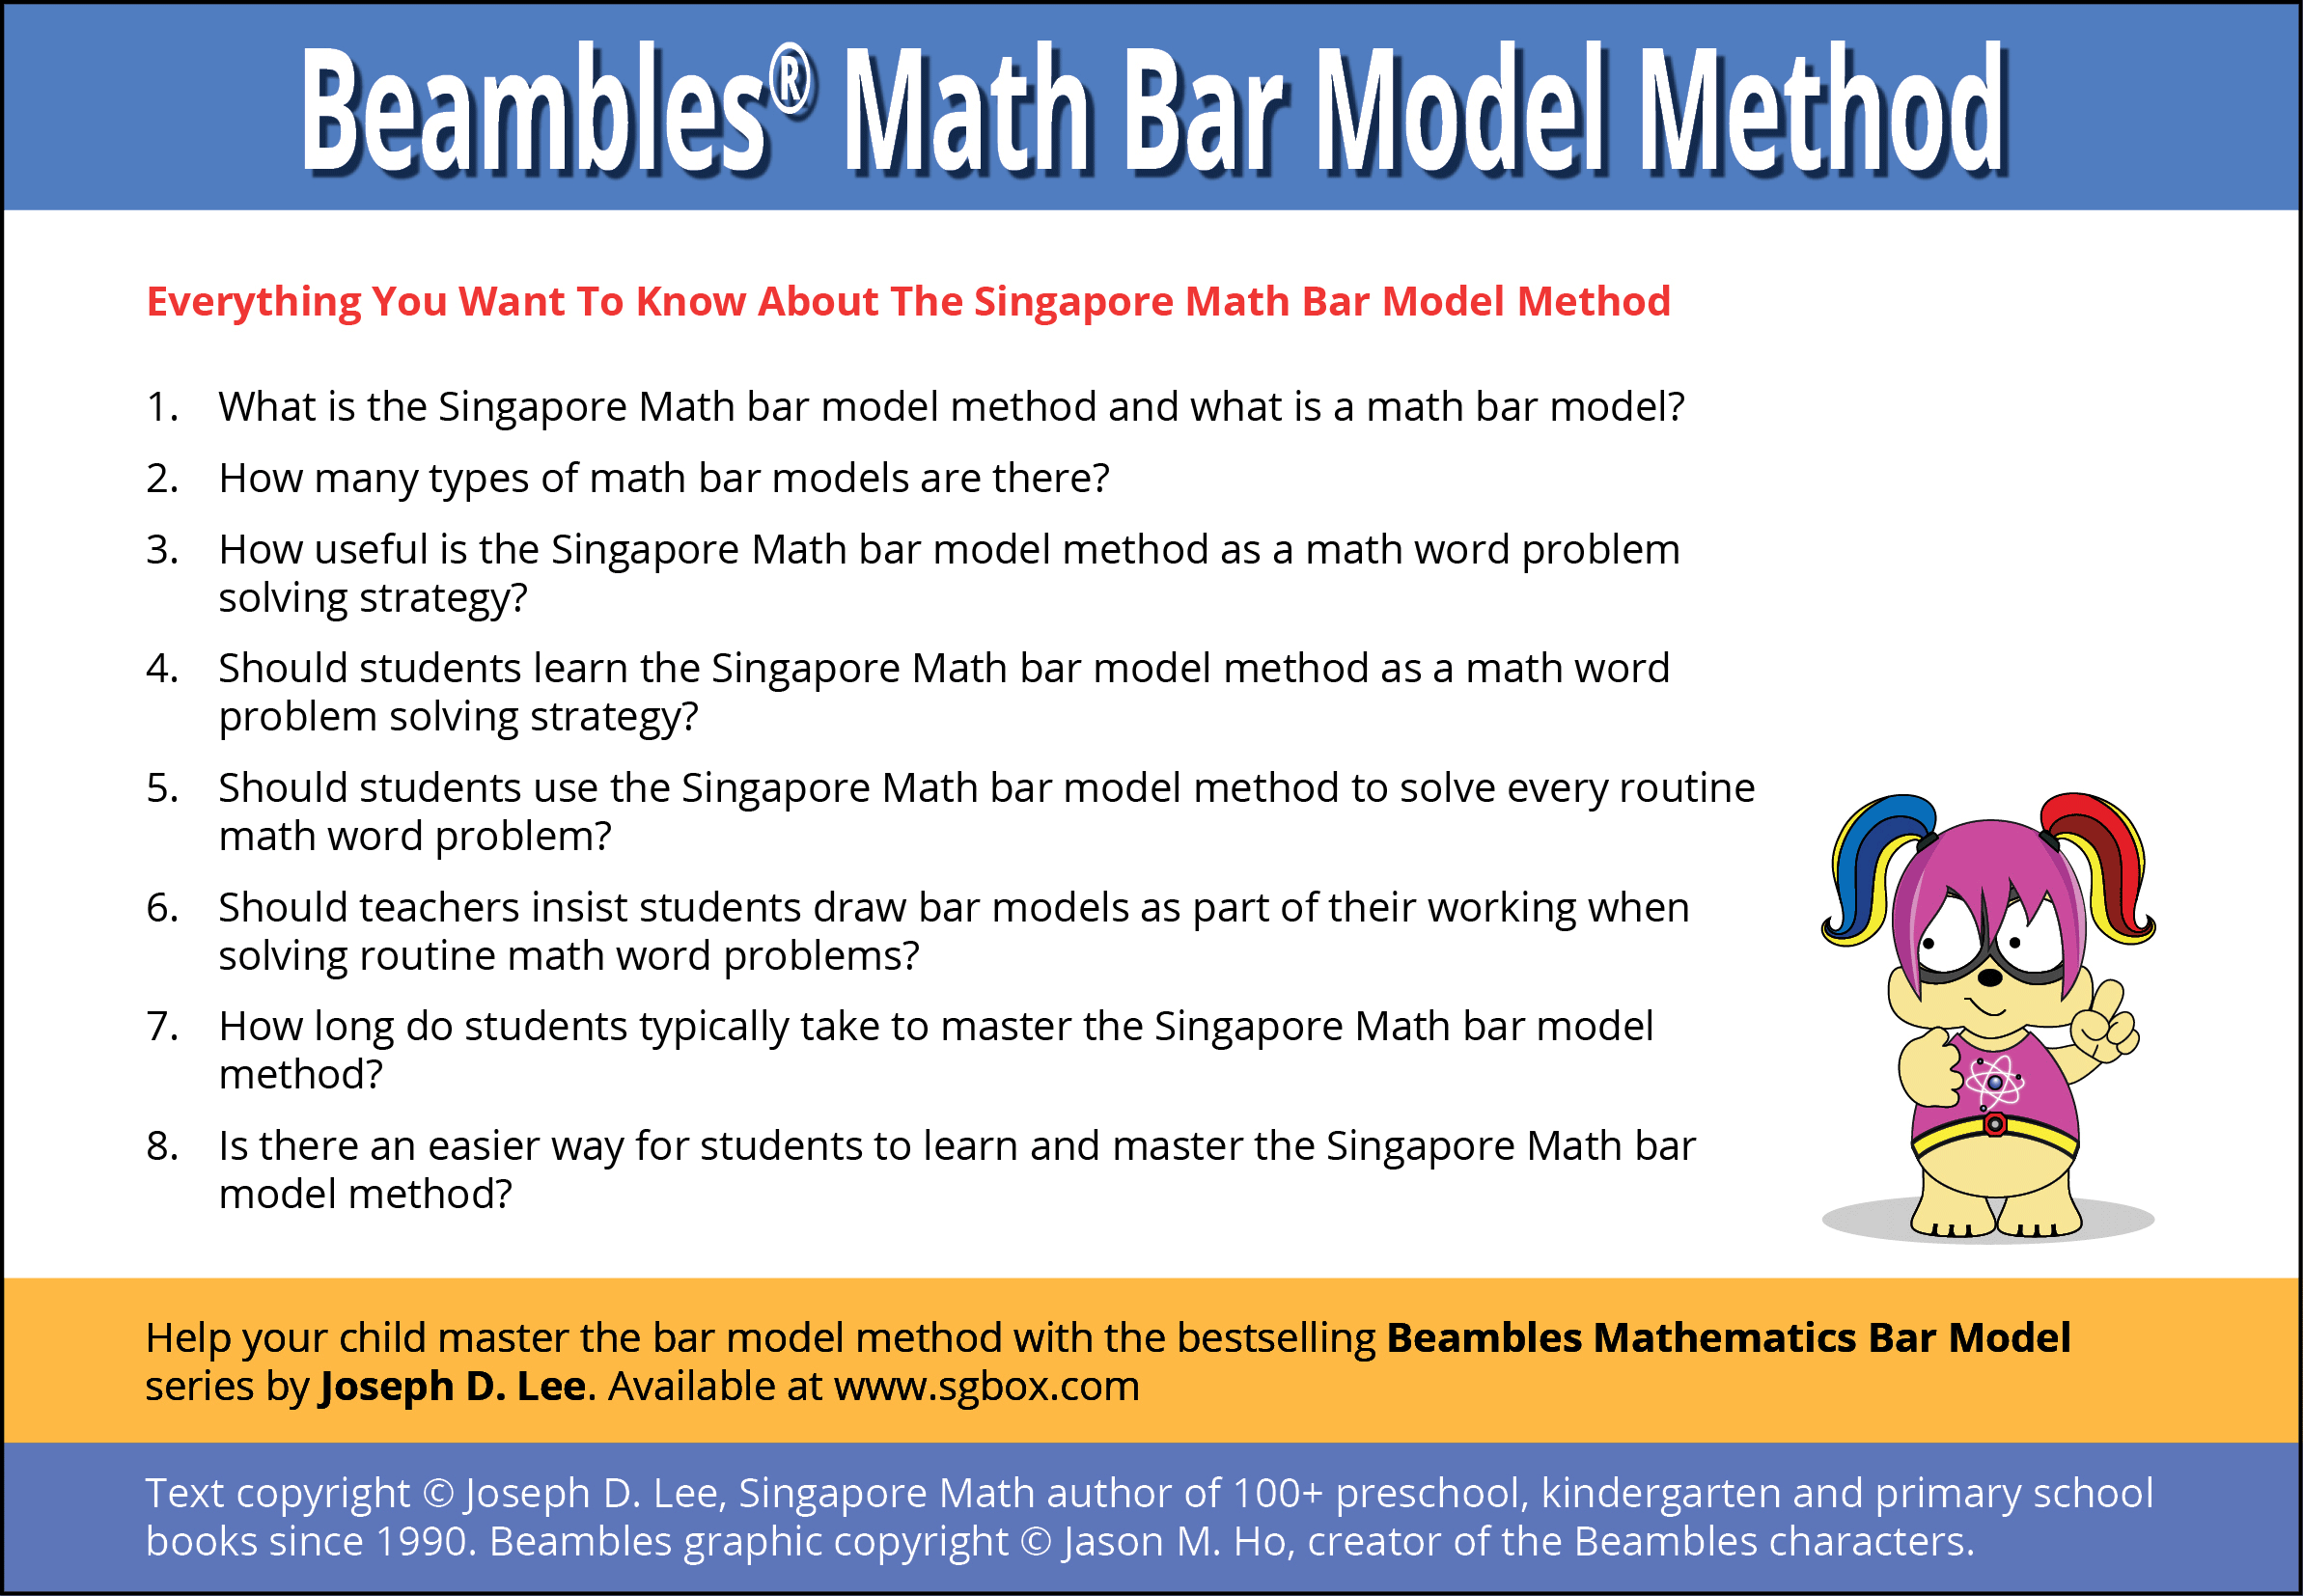 8 Questions Answered About The Singapore Math Bar Model Method